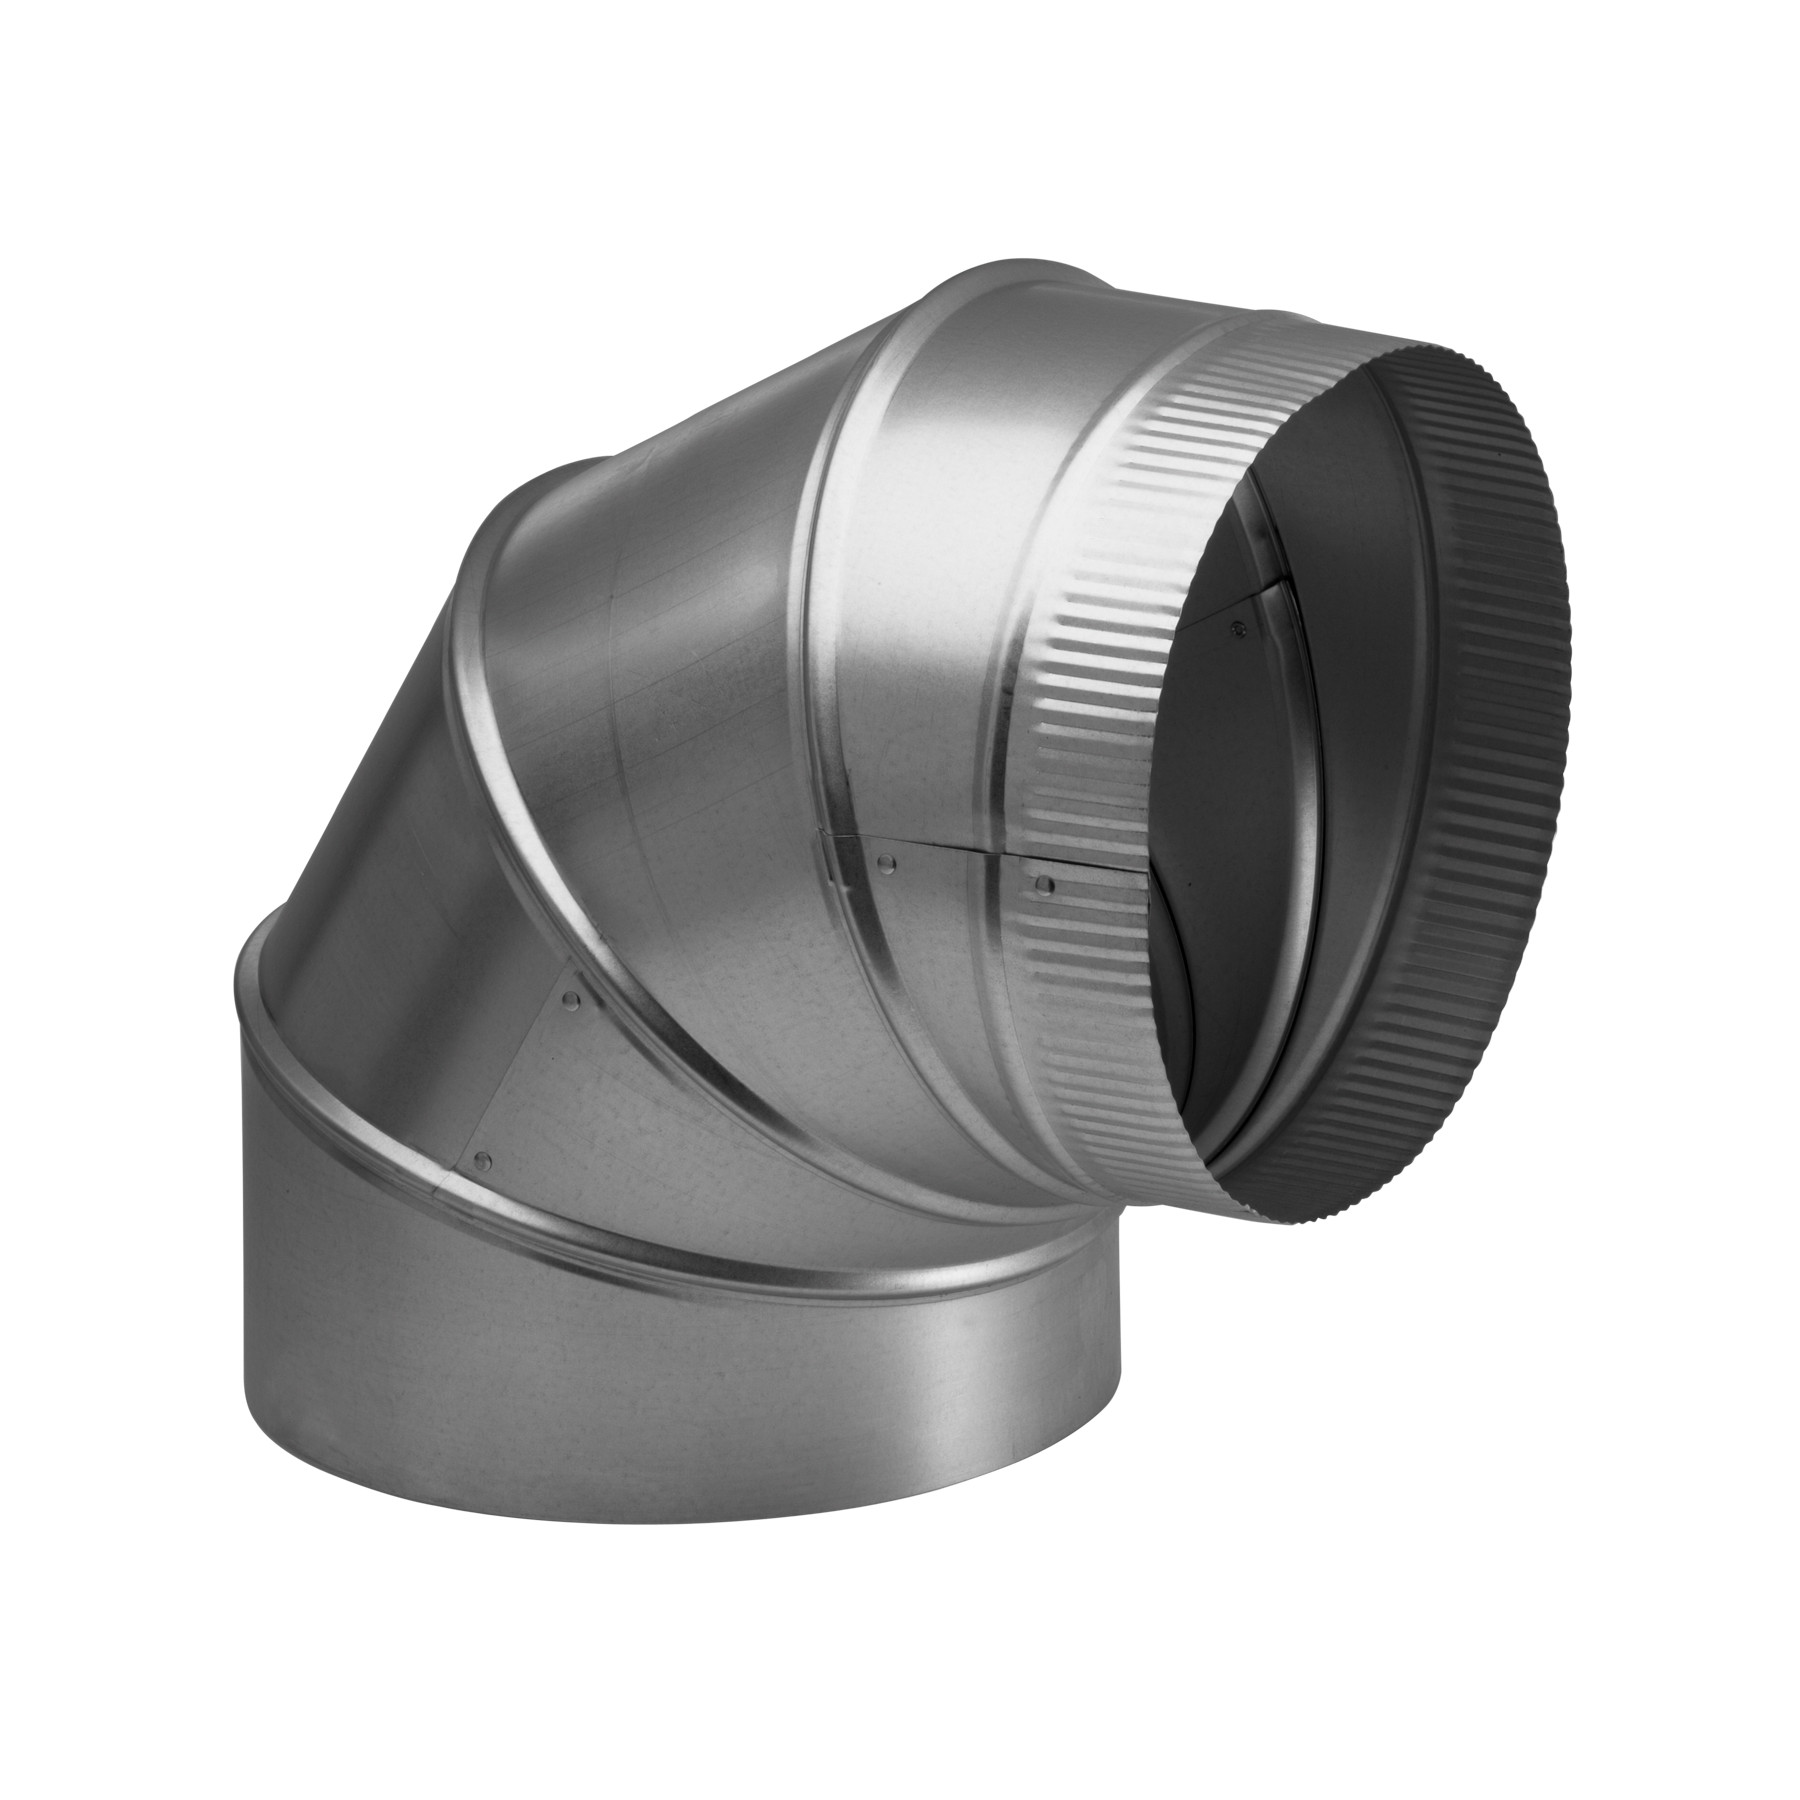 10-Inch Round Elbow Duct for Range Hoods and Bath Ventilation Fans